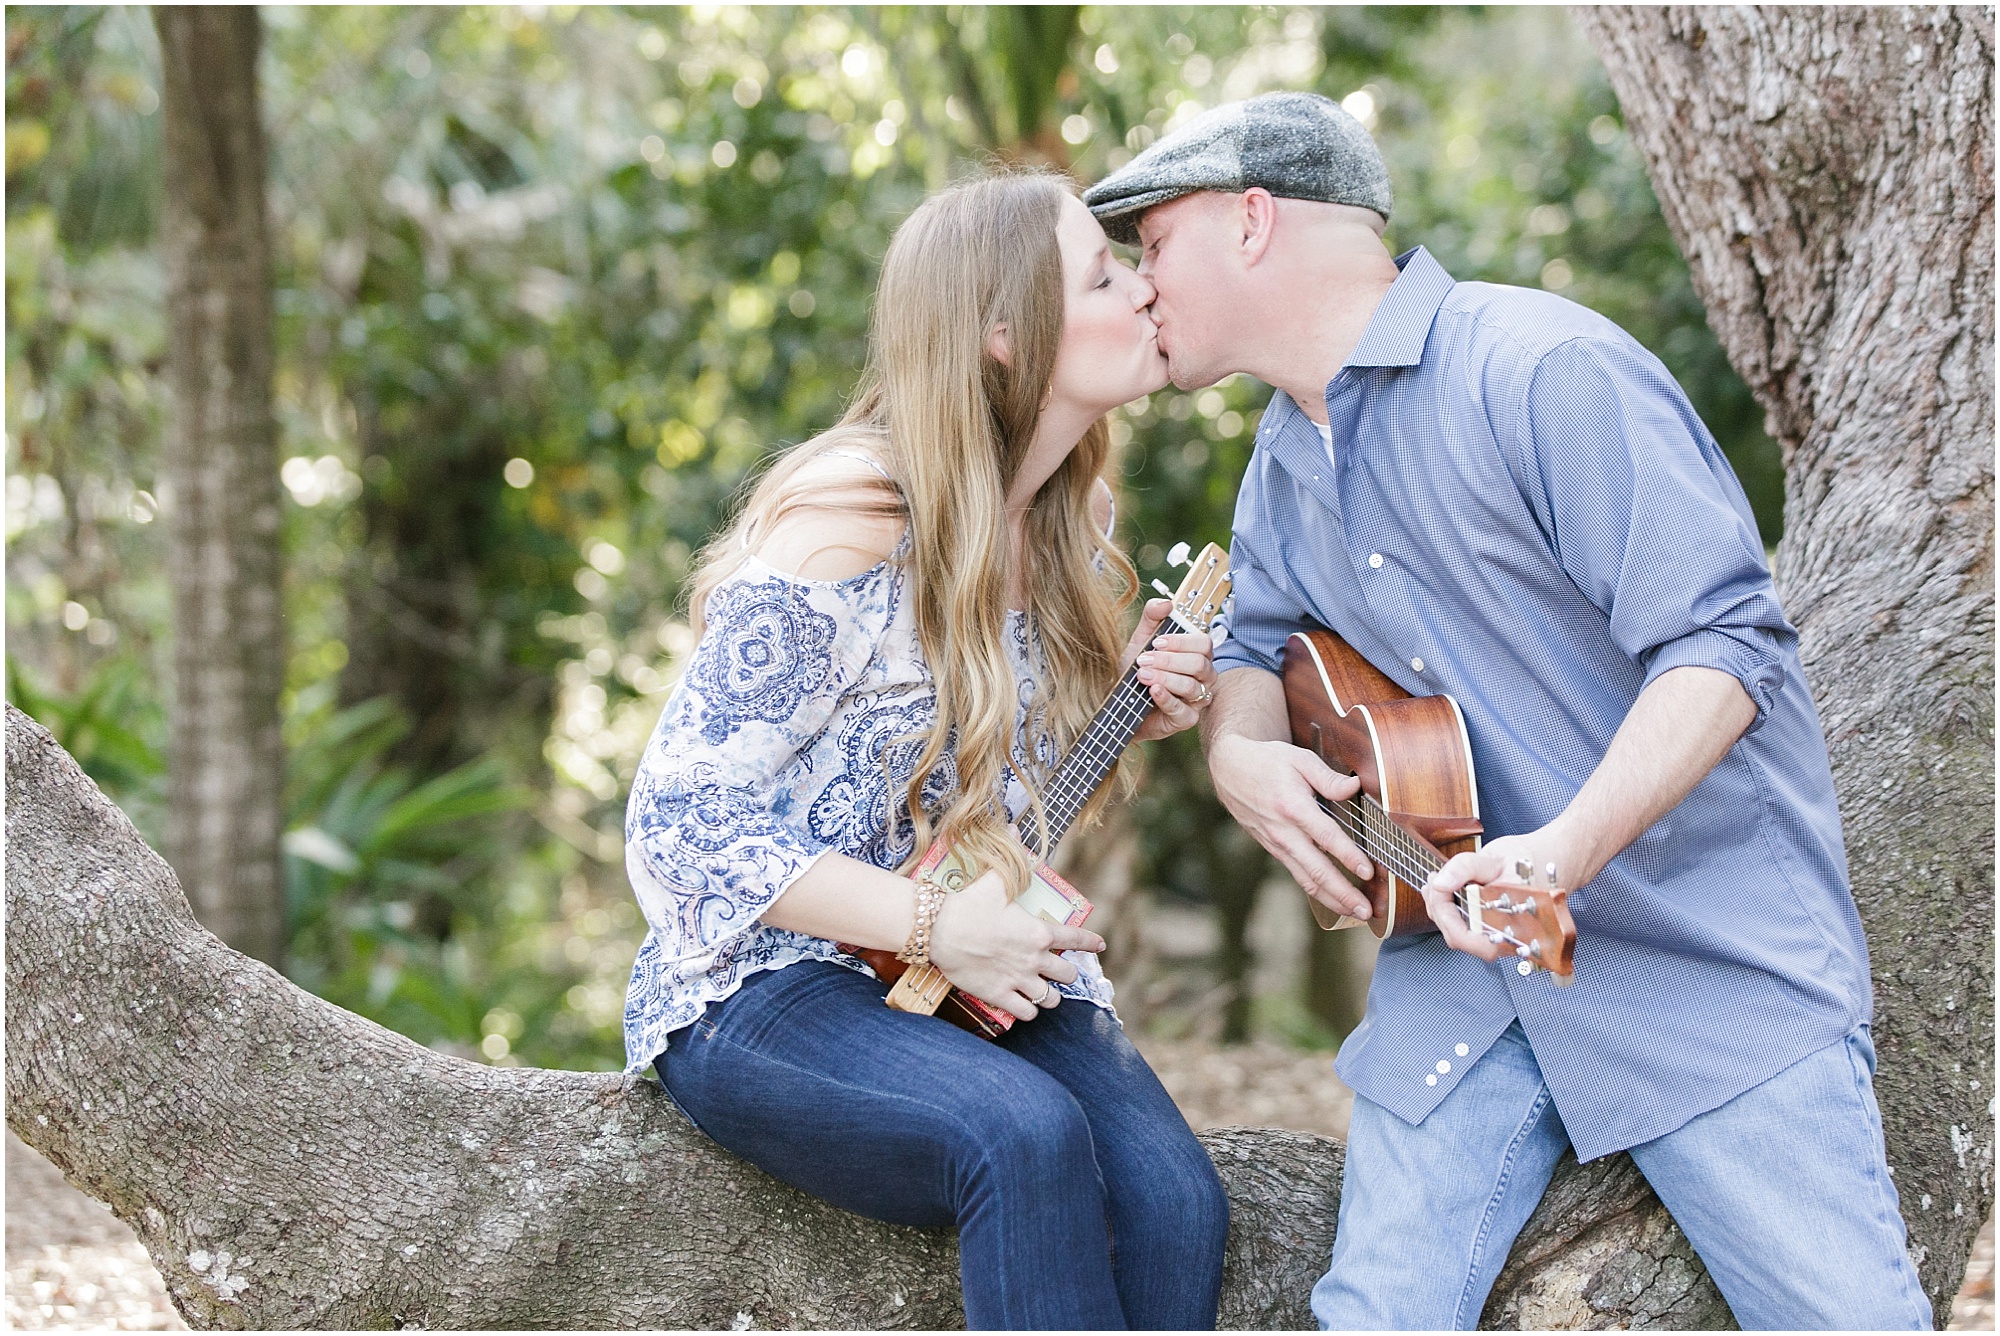 Musical outdoor engagement session couple kissing in a tree.